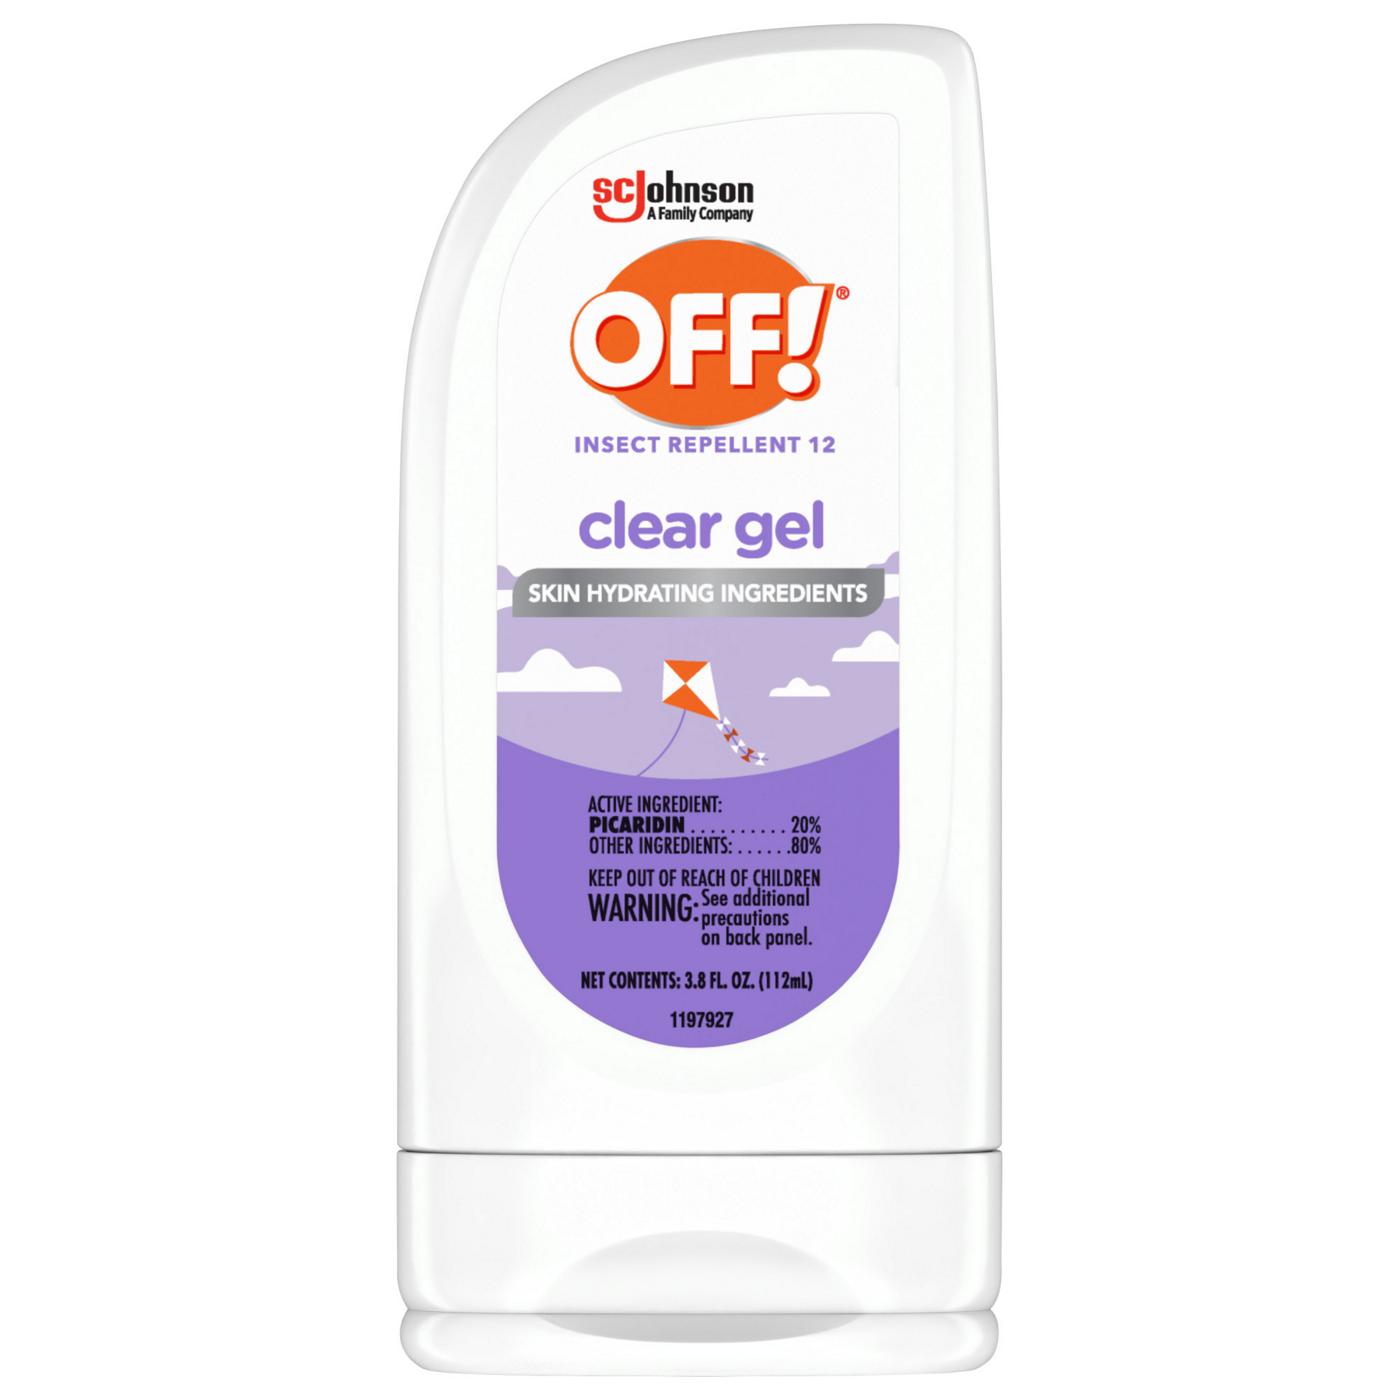 Off! Clear Gel Insect Repellent 12; image 1 of 7